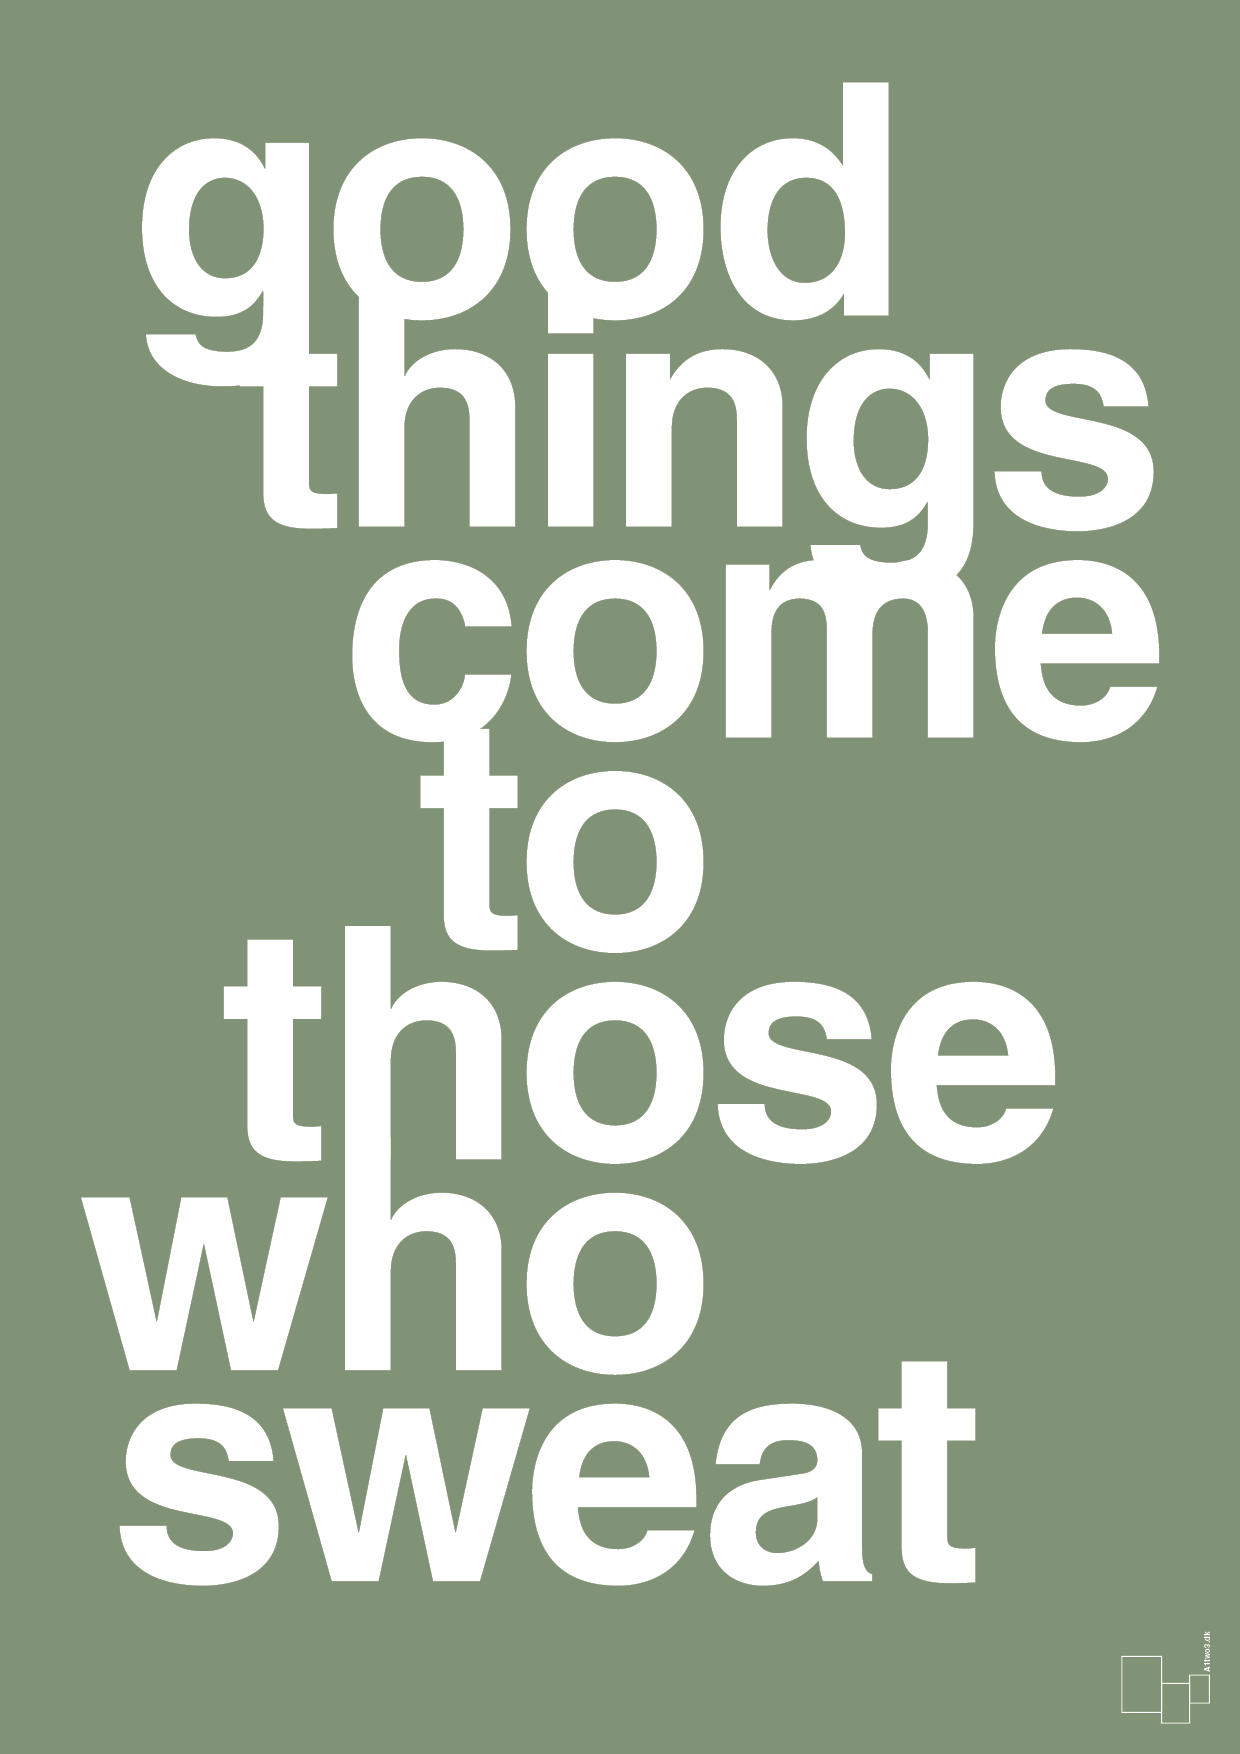 good things come to those who sweat - Plakat med Sport & Fritid i Jade